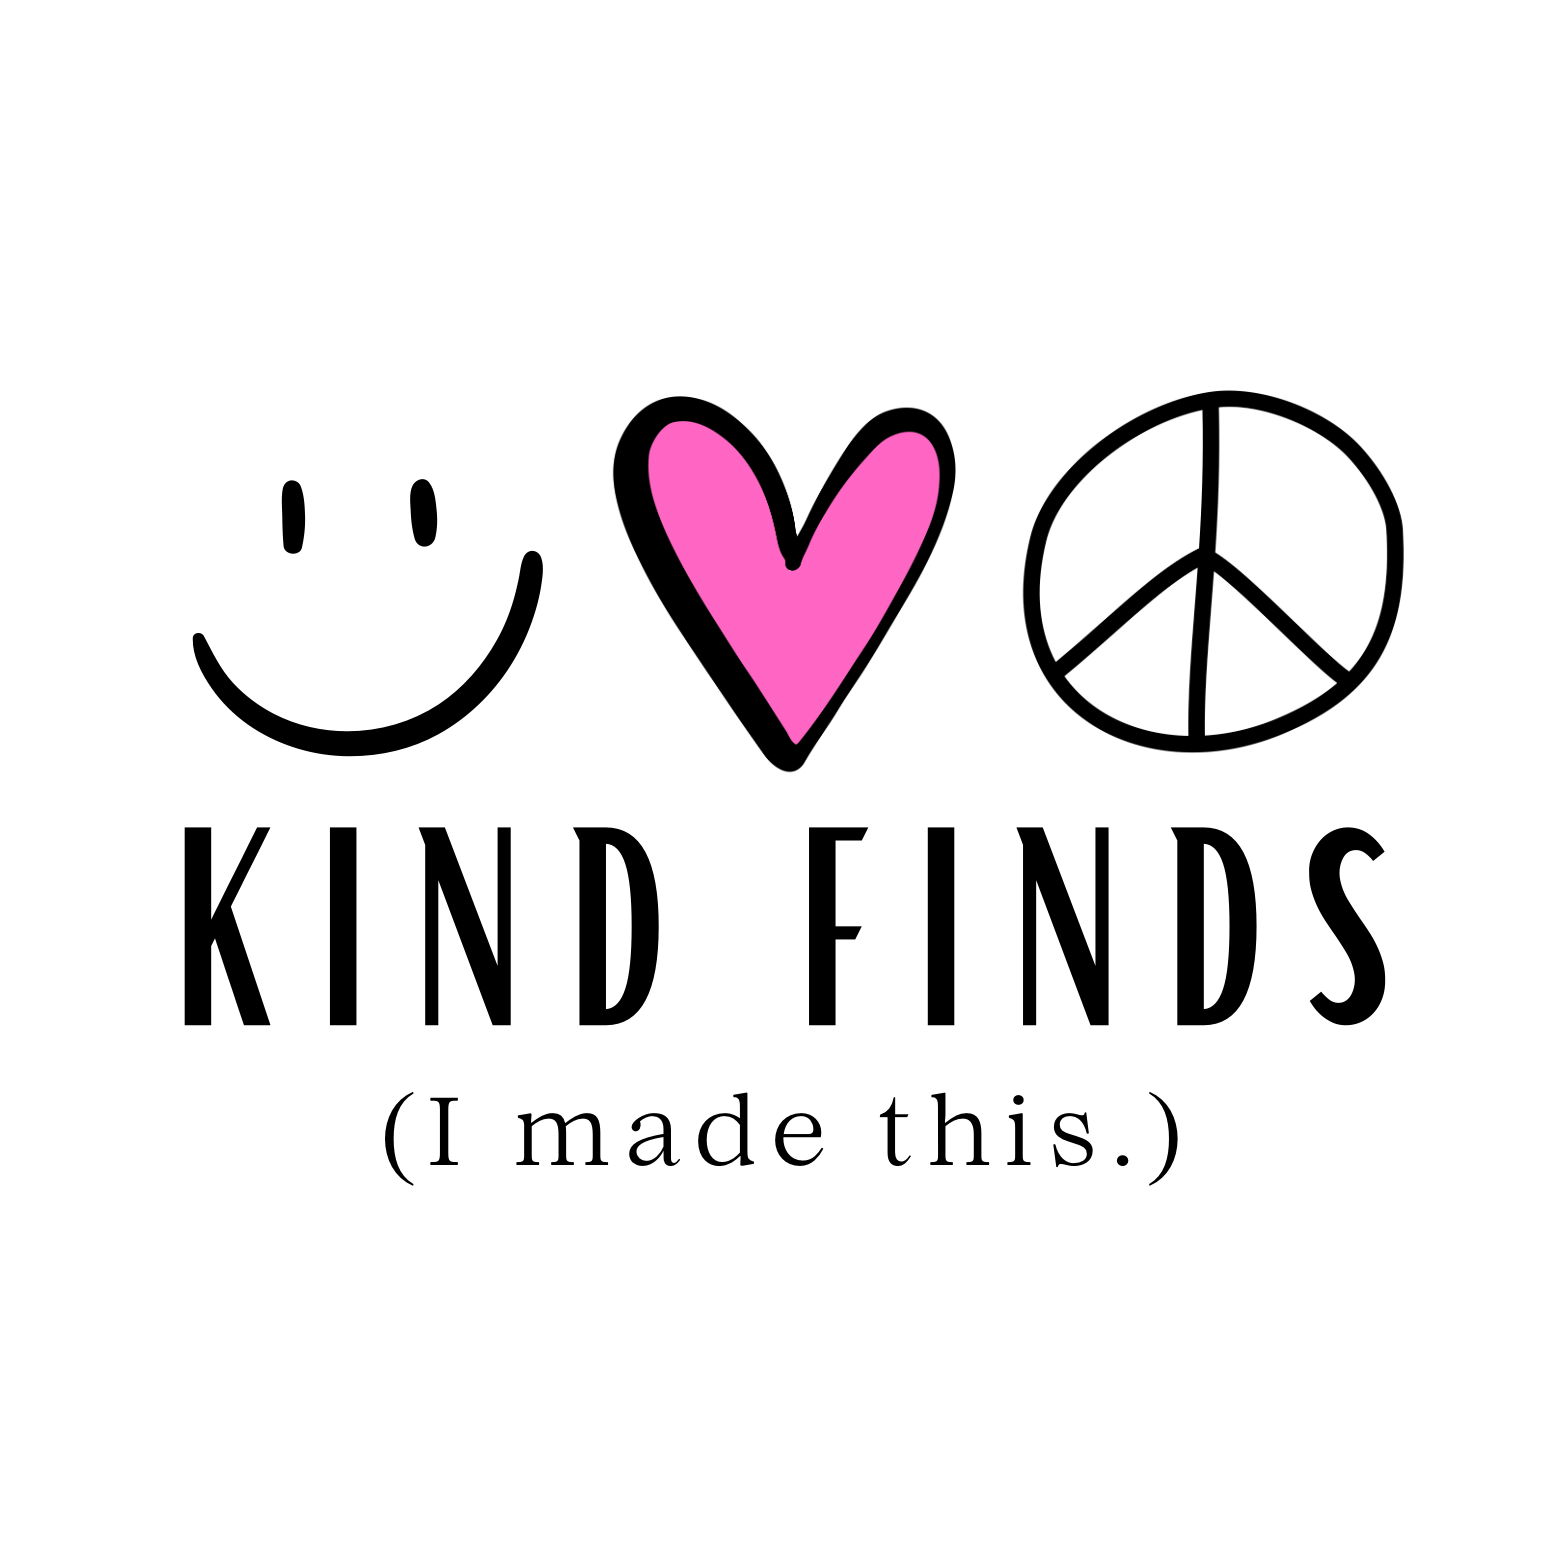 smiley face, pink heart, peace sign logo, Kind Finds, with I made this underneath.